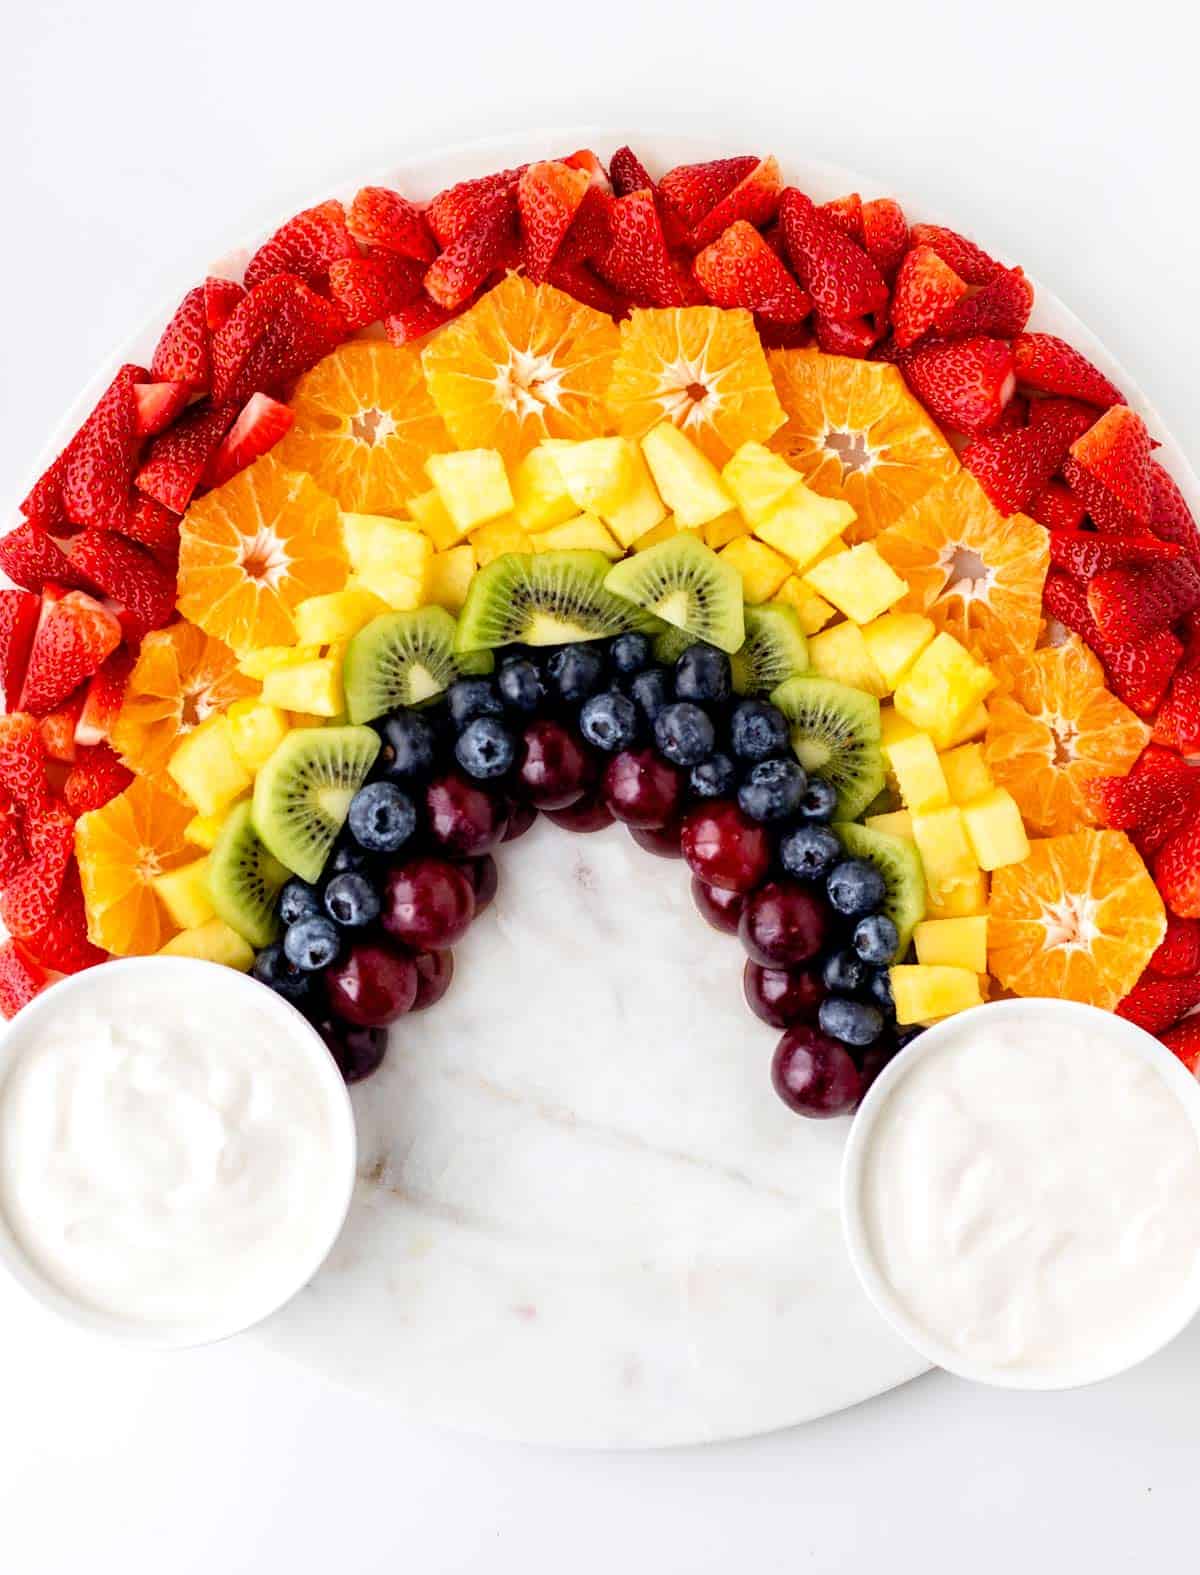 A fully assembled rainbow fruit board with two small bowls of yogurt dip on each side to resemble clouds.